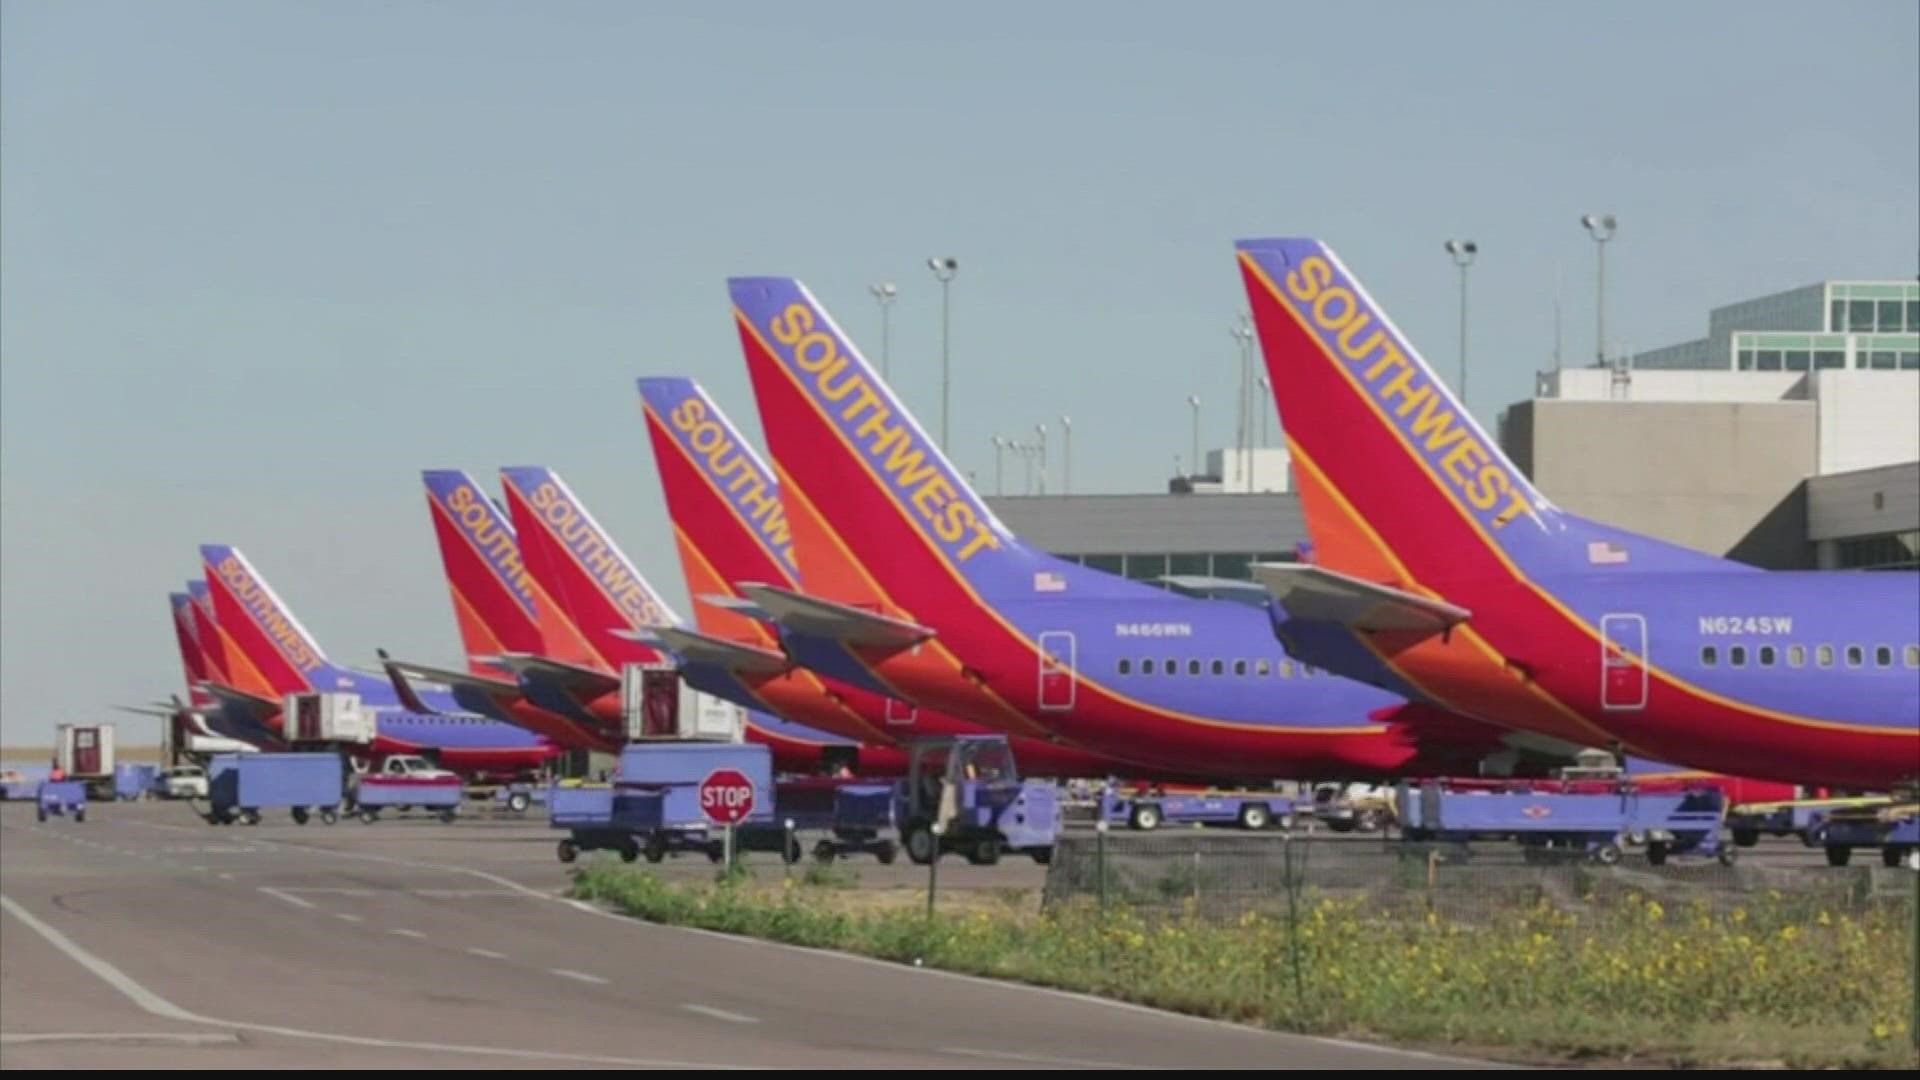 Union officials stated that flight attendants have experienced passenger aggression, airline technology mishaps, lack of food and rest, and threats of pay cuts.